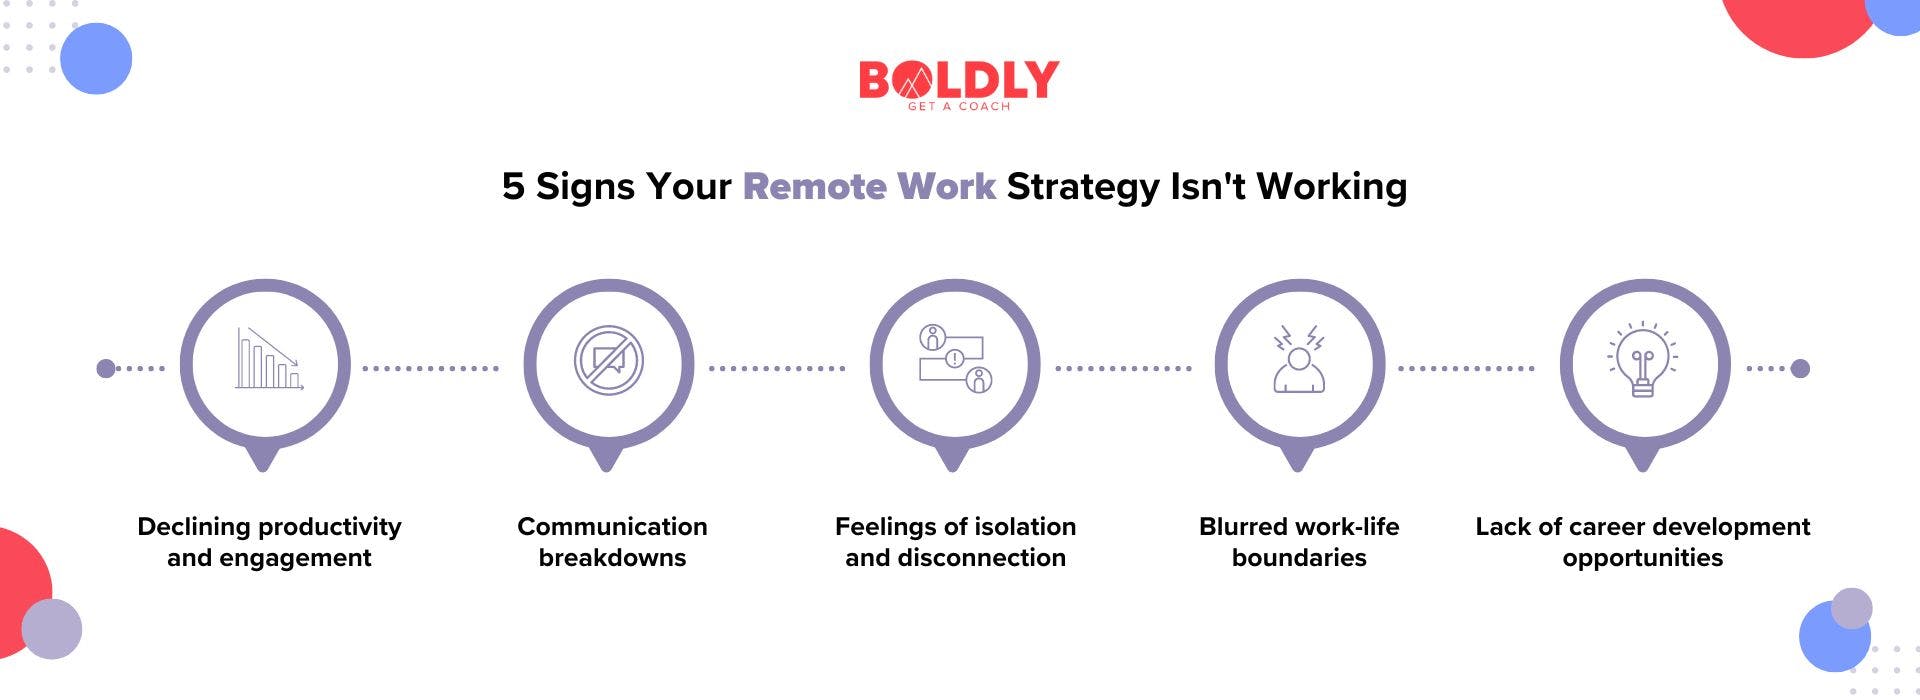 Signs that your Remote Work Strategy is not working 